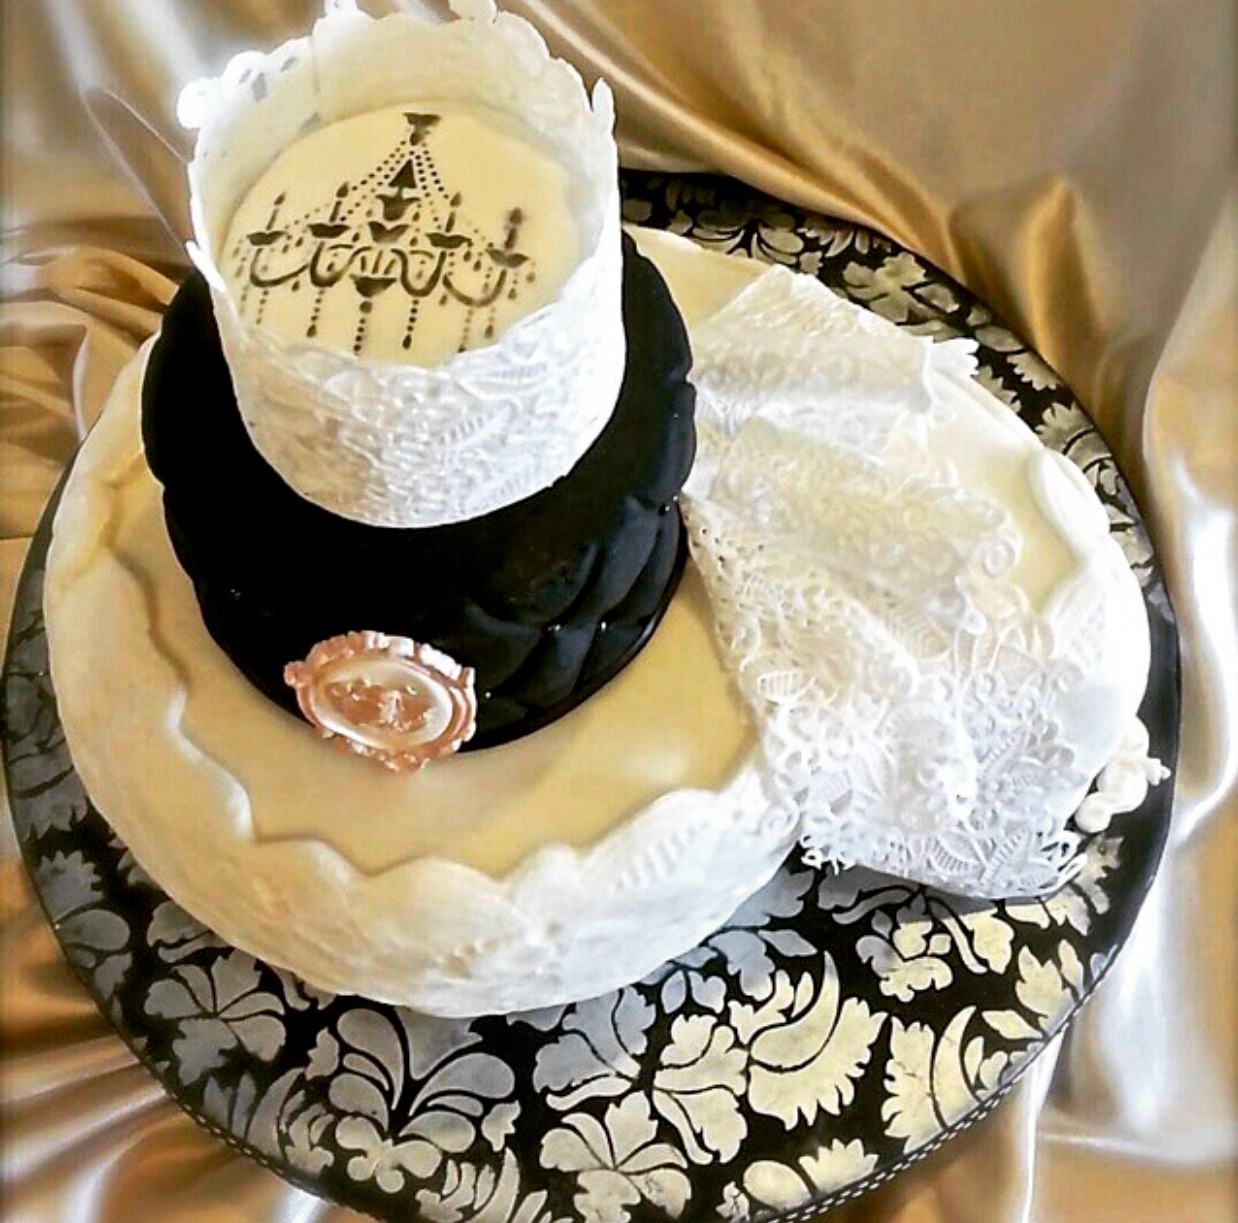 SALTS Cake Couture